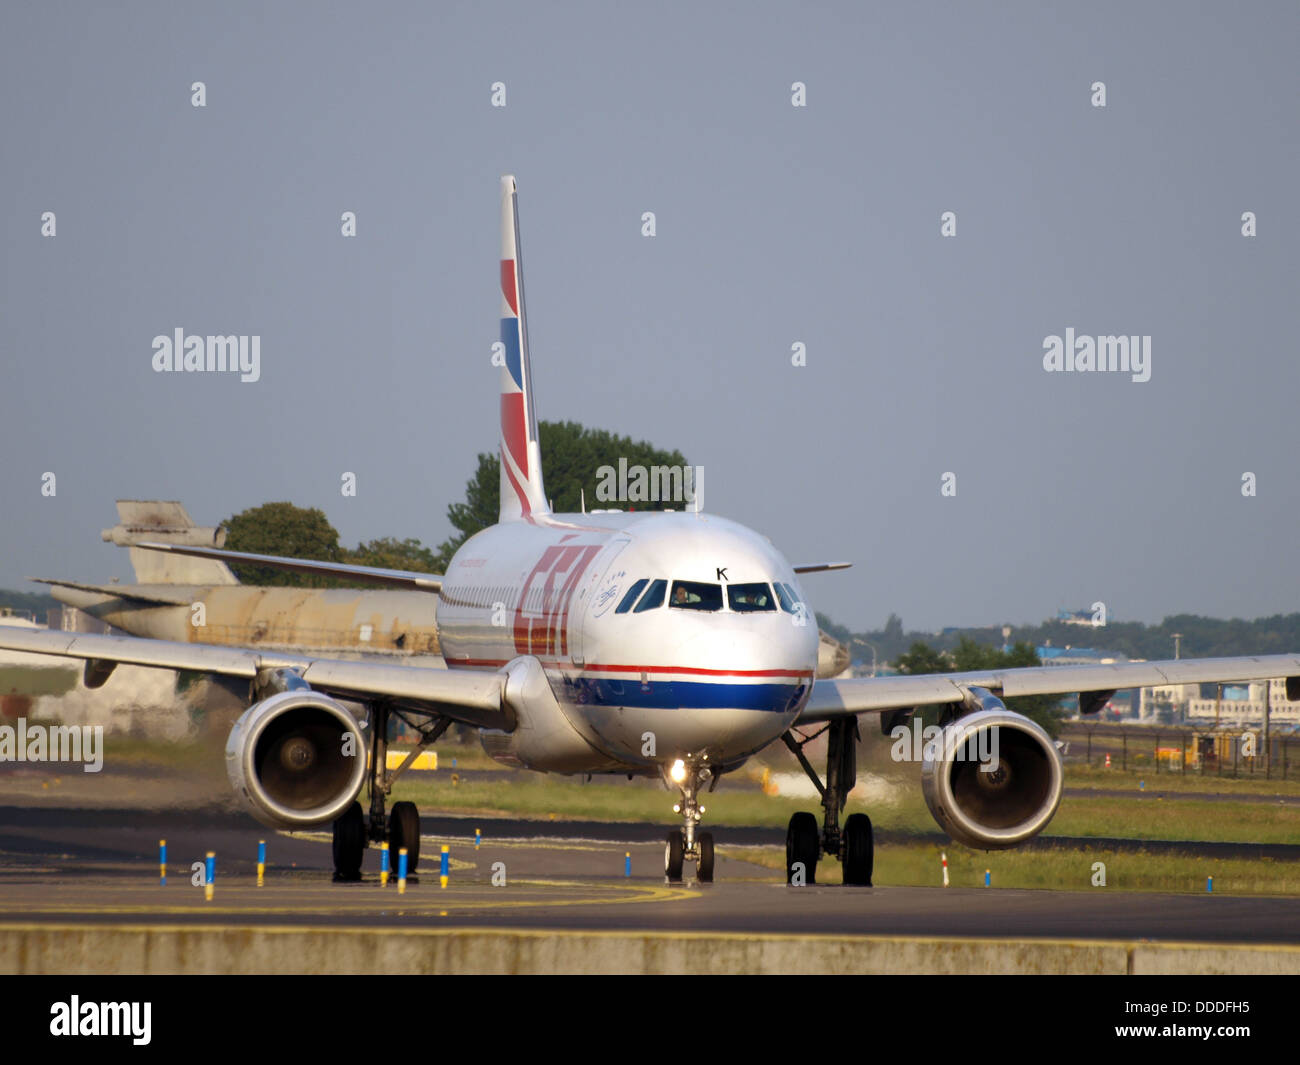 OK-MEK Czech Airlines (CSA) Airbus A319-112 - cn 3043 taxiing 22july2013 pic-001 Stock Photo